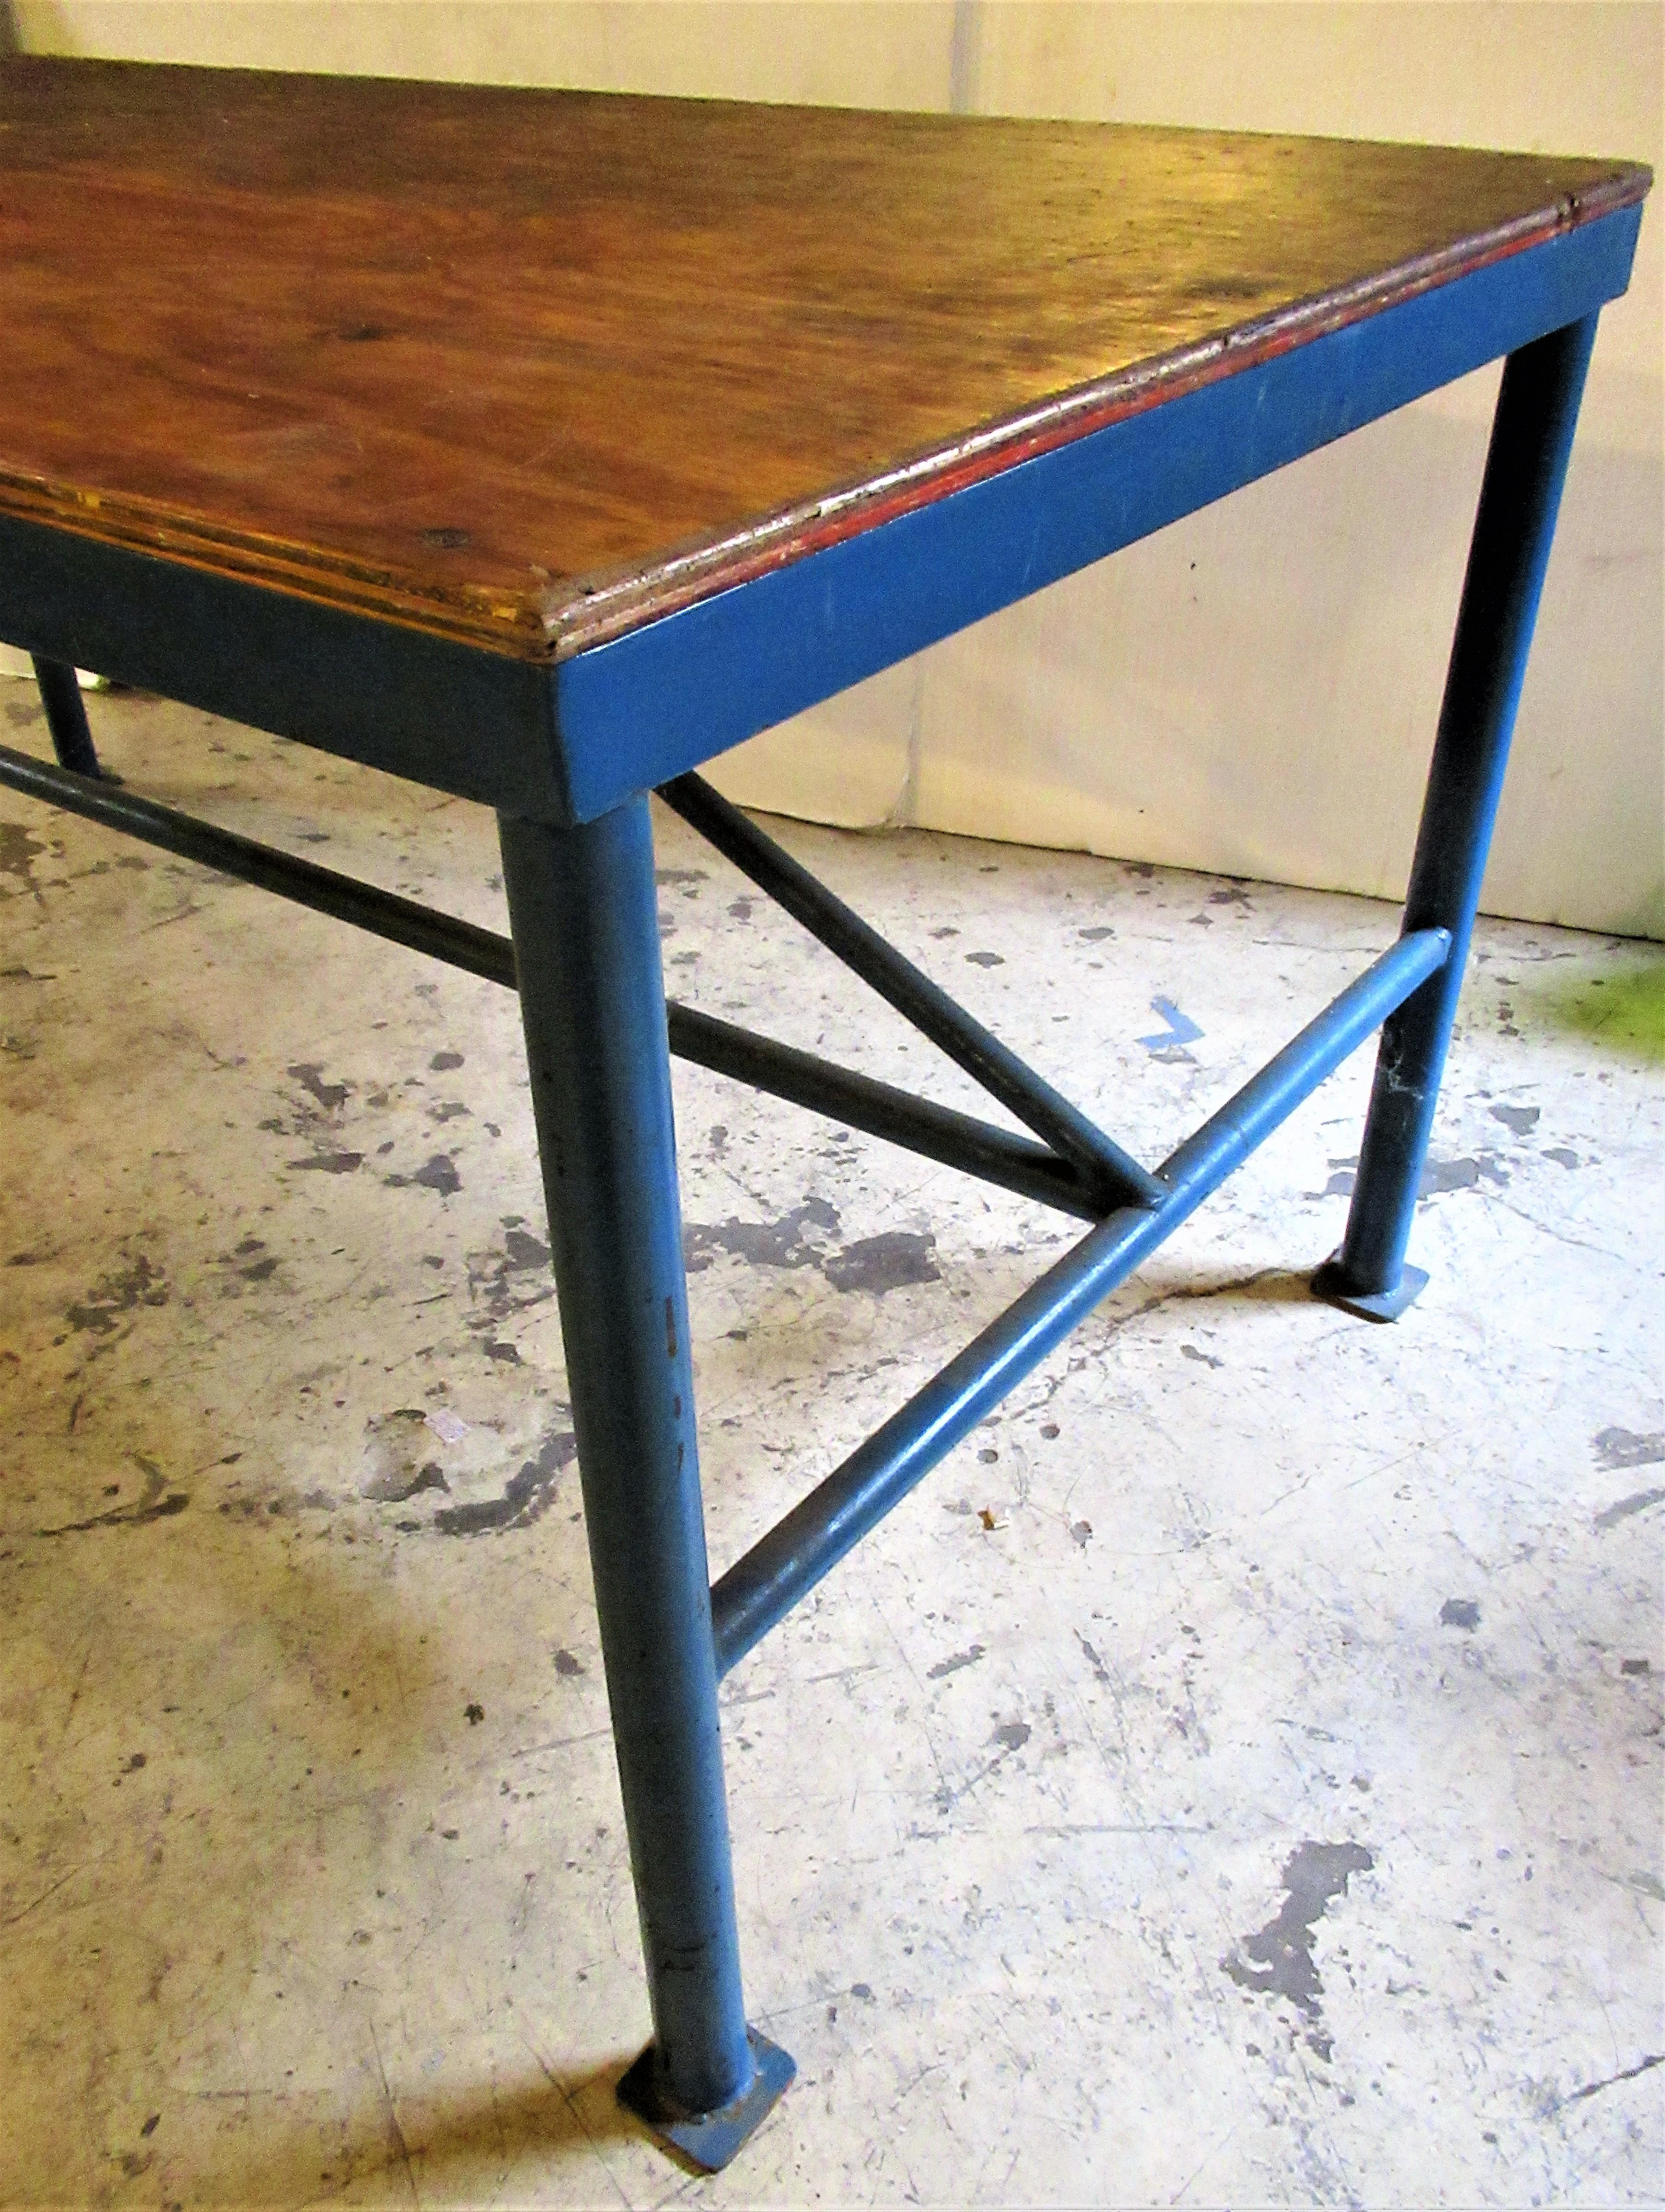  All original American industrial factory work table with beautifully aged rich blue painted    
  architectural iron base and thick plywood top. Circa 1930-1940. This is a good one. Look at all pictures and read condition report in comment section.